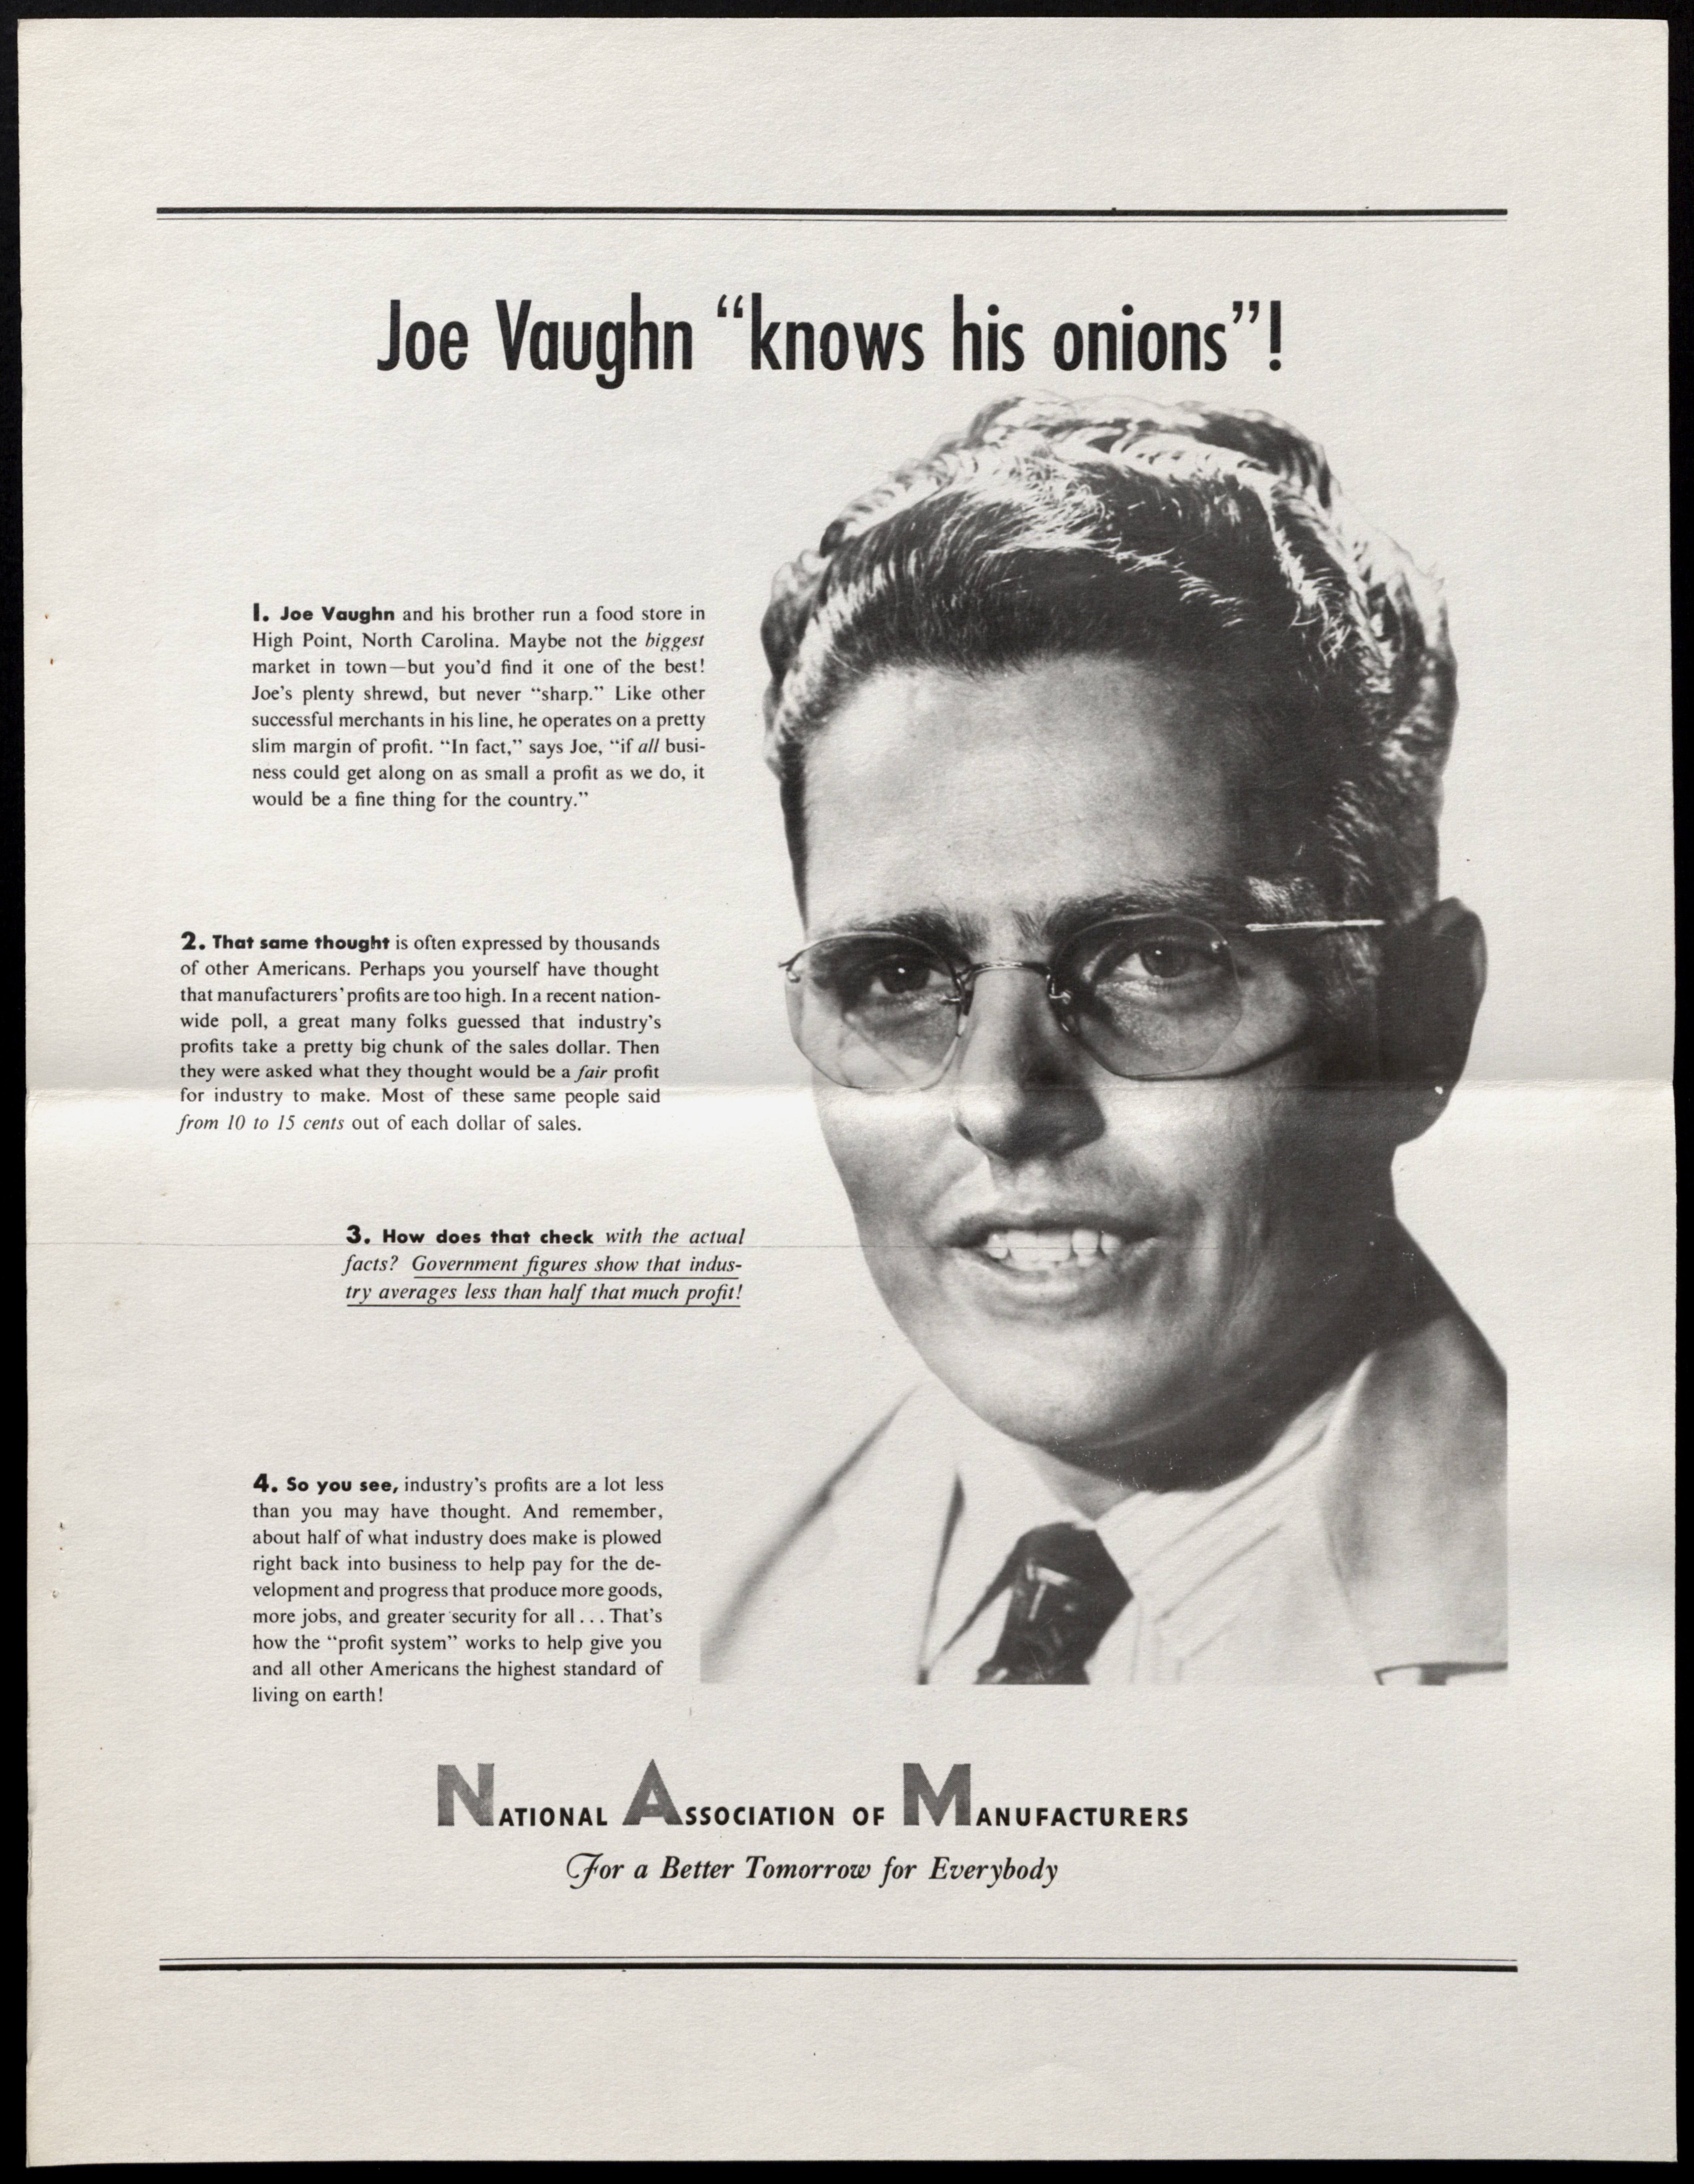 Black and white headshot of a man with glasses. Text header reads "Joe Vaughn 'knows his onions'", additional text to the side.